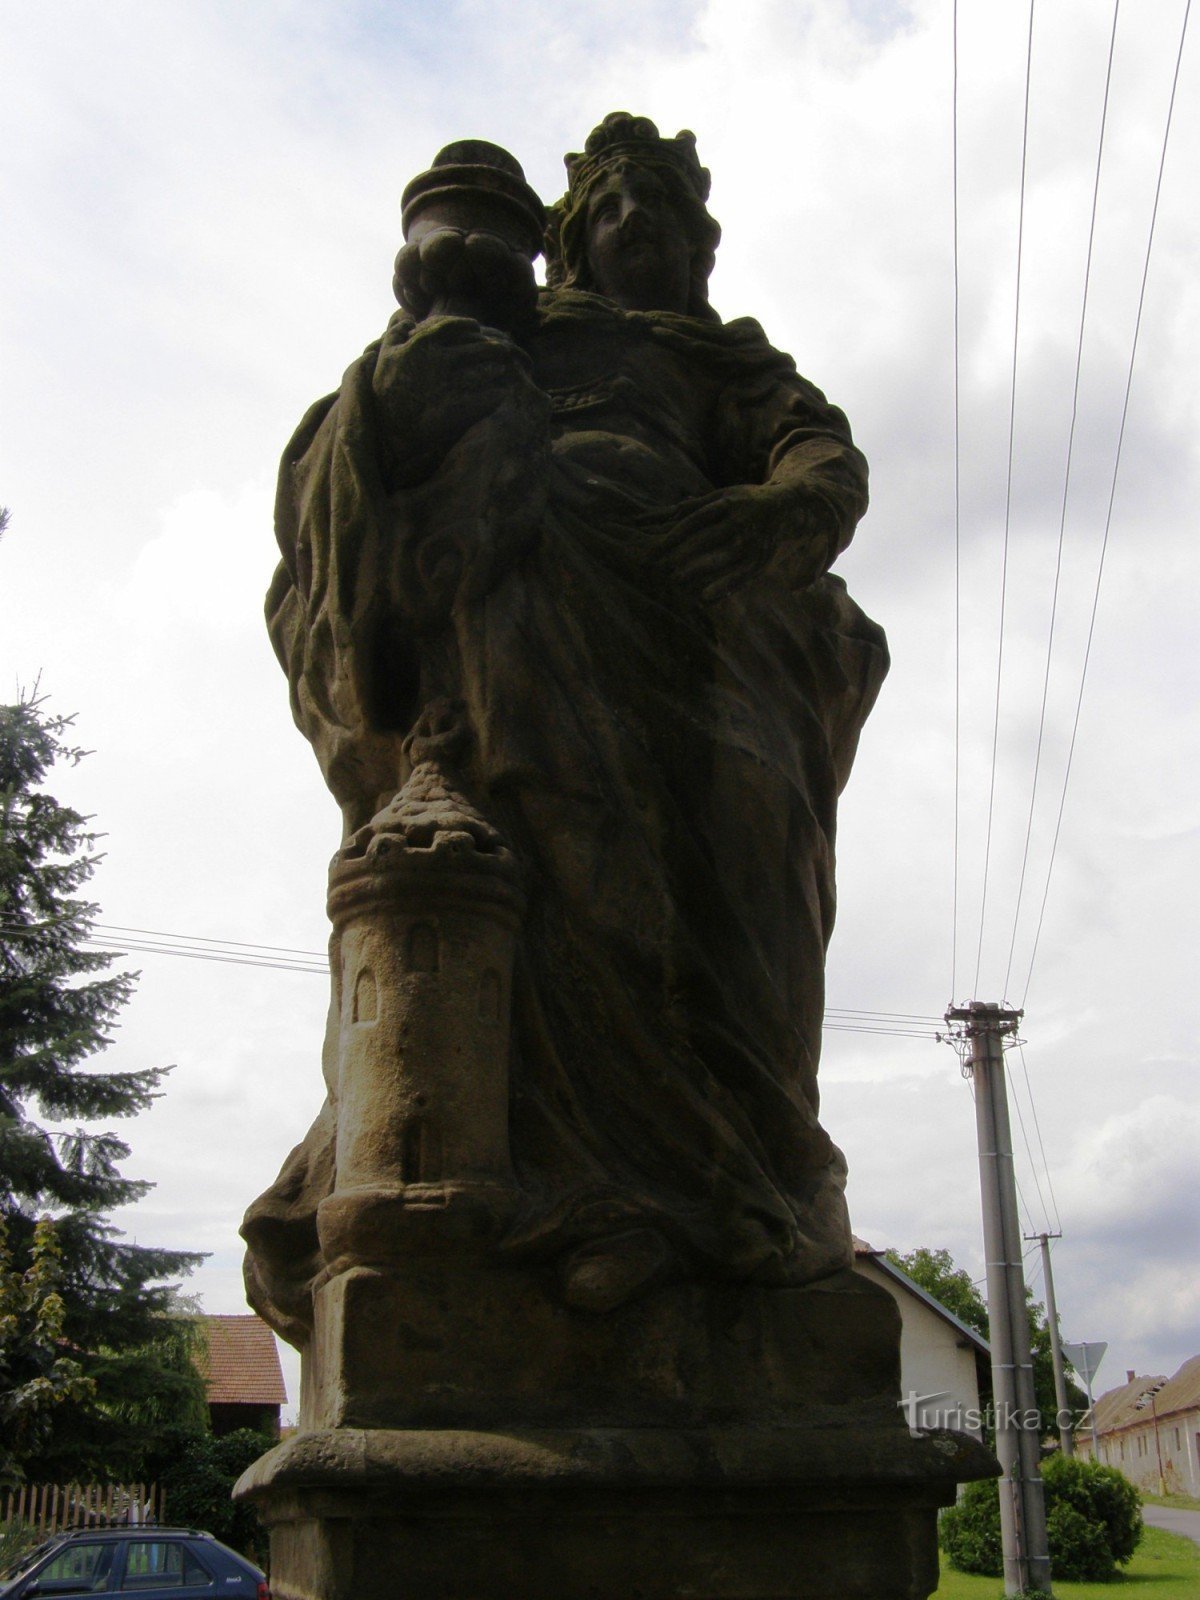 Hlušice - double statues of St. Virgin Mary and St. Barbara